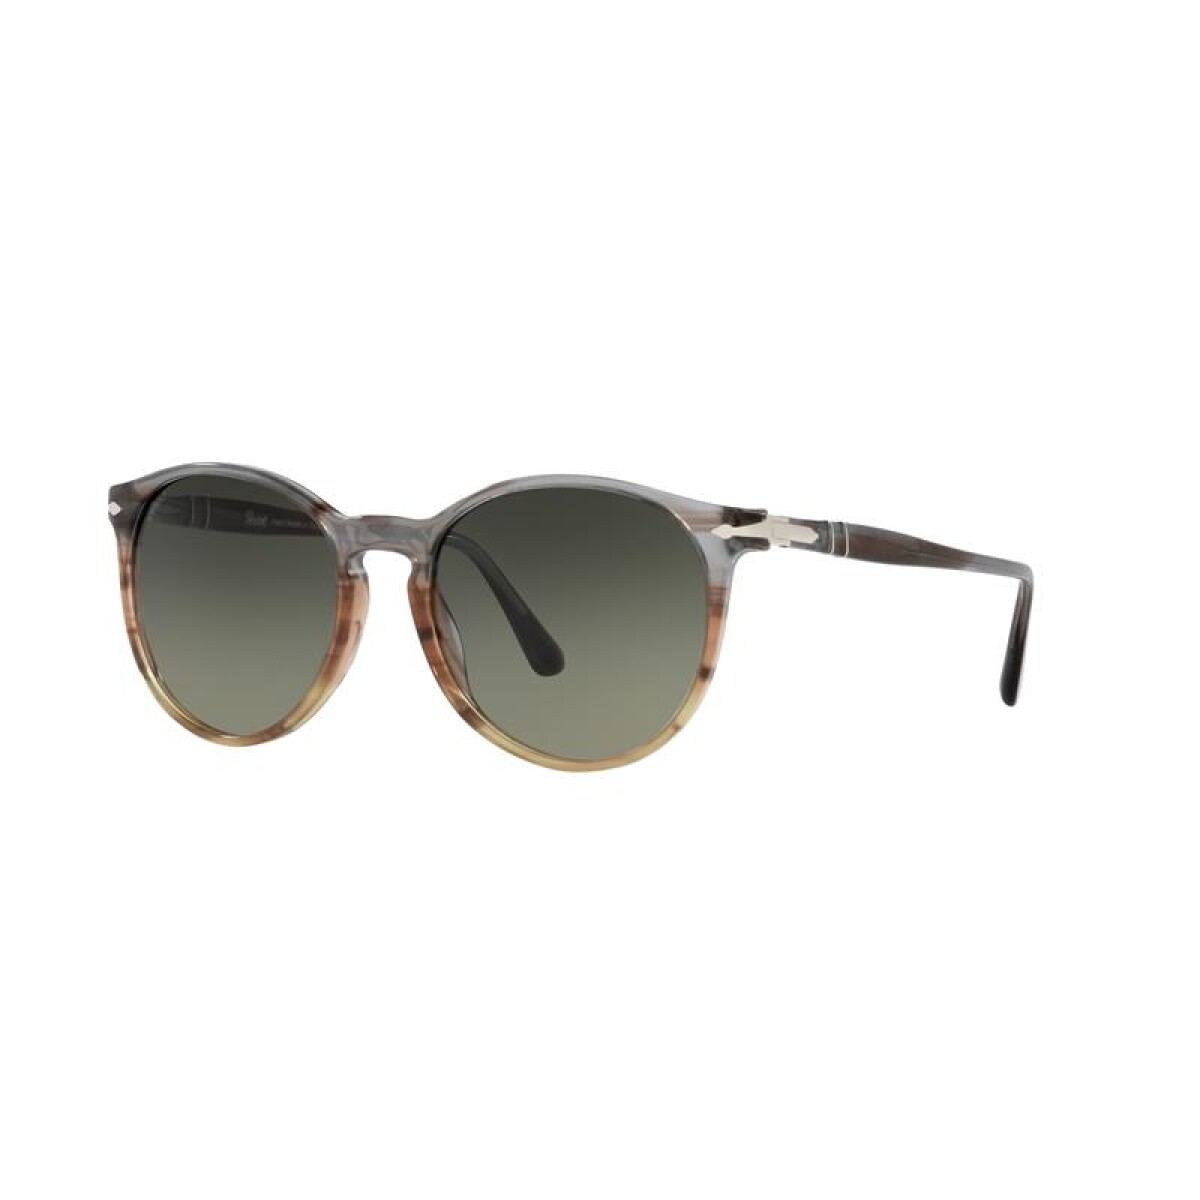 Persol 3228-s - 1137/71 